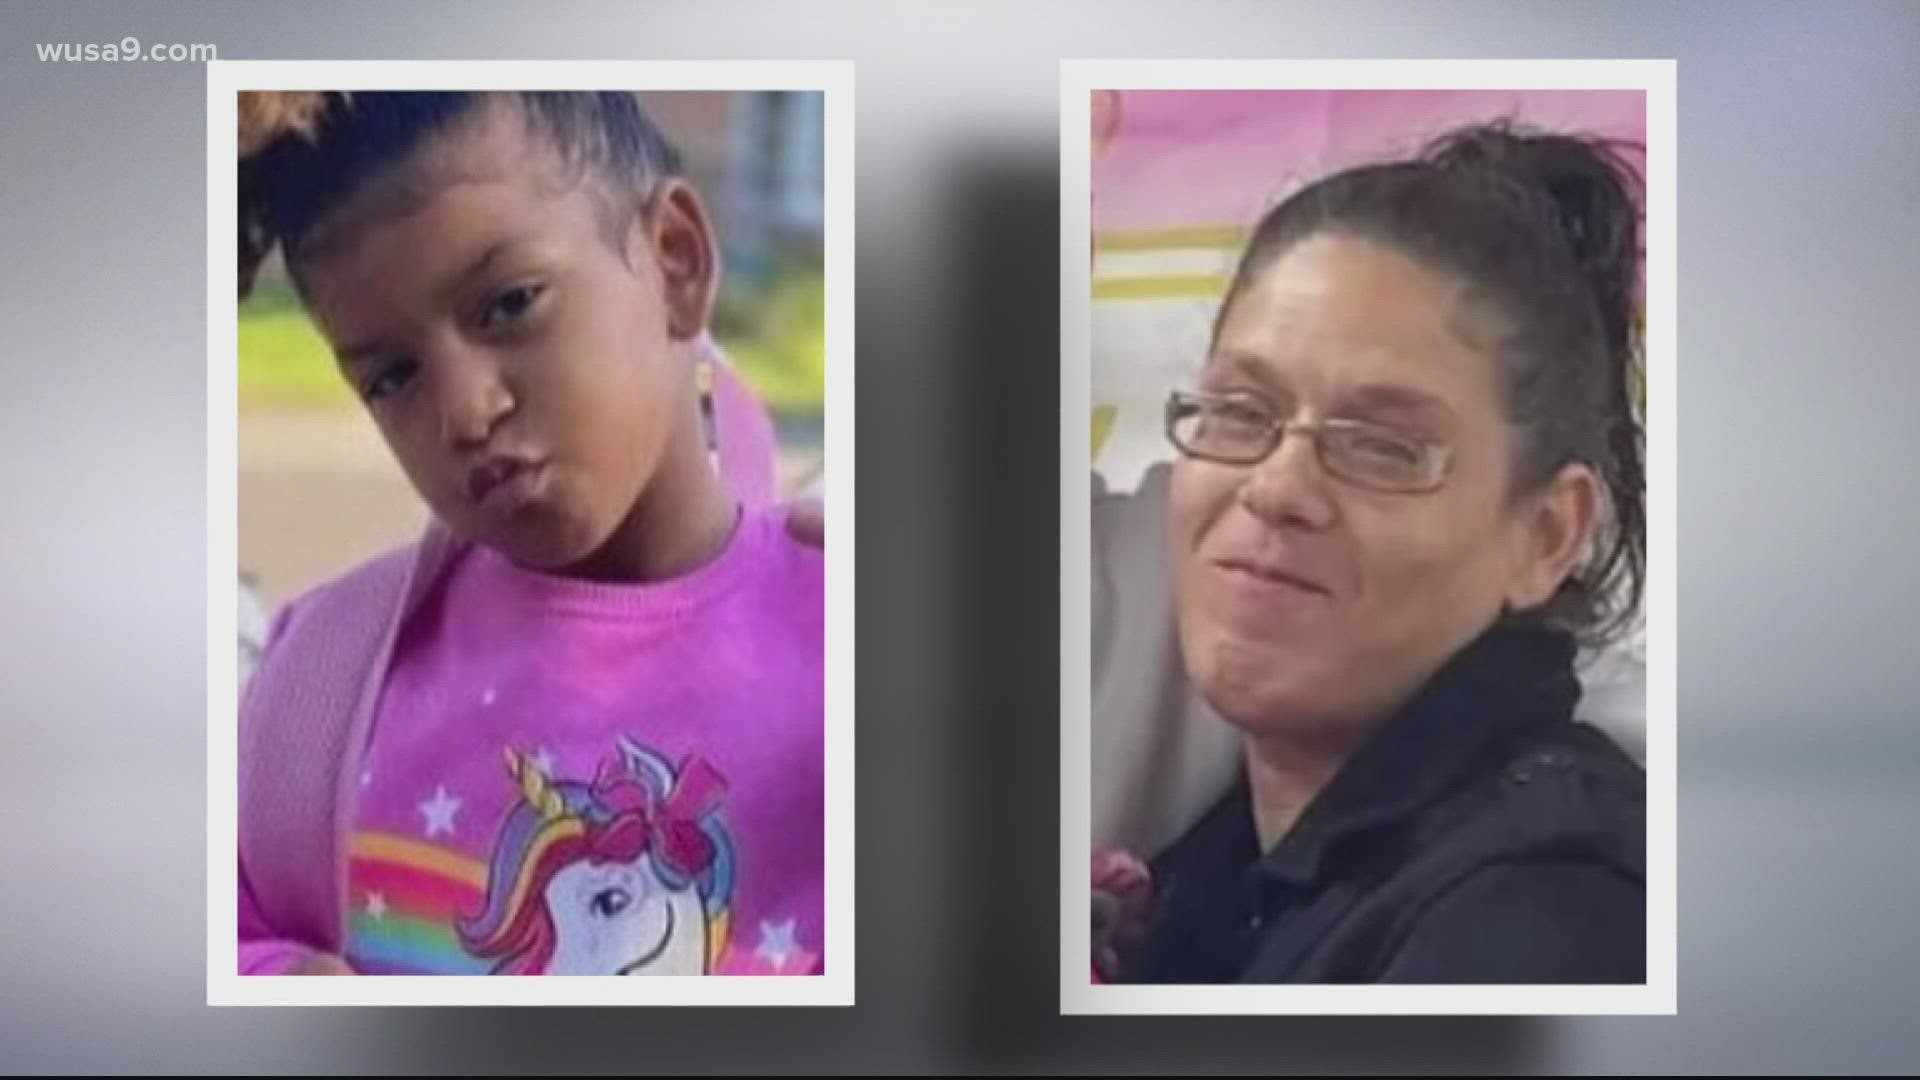 The family of a mother and daughter killed in St. Mary's County feared it would happen.